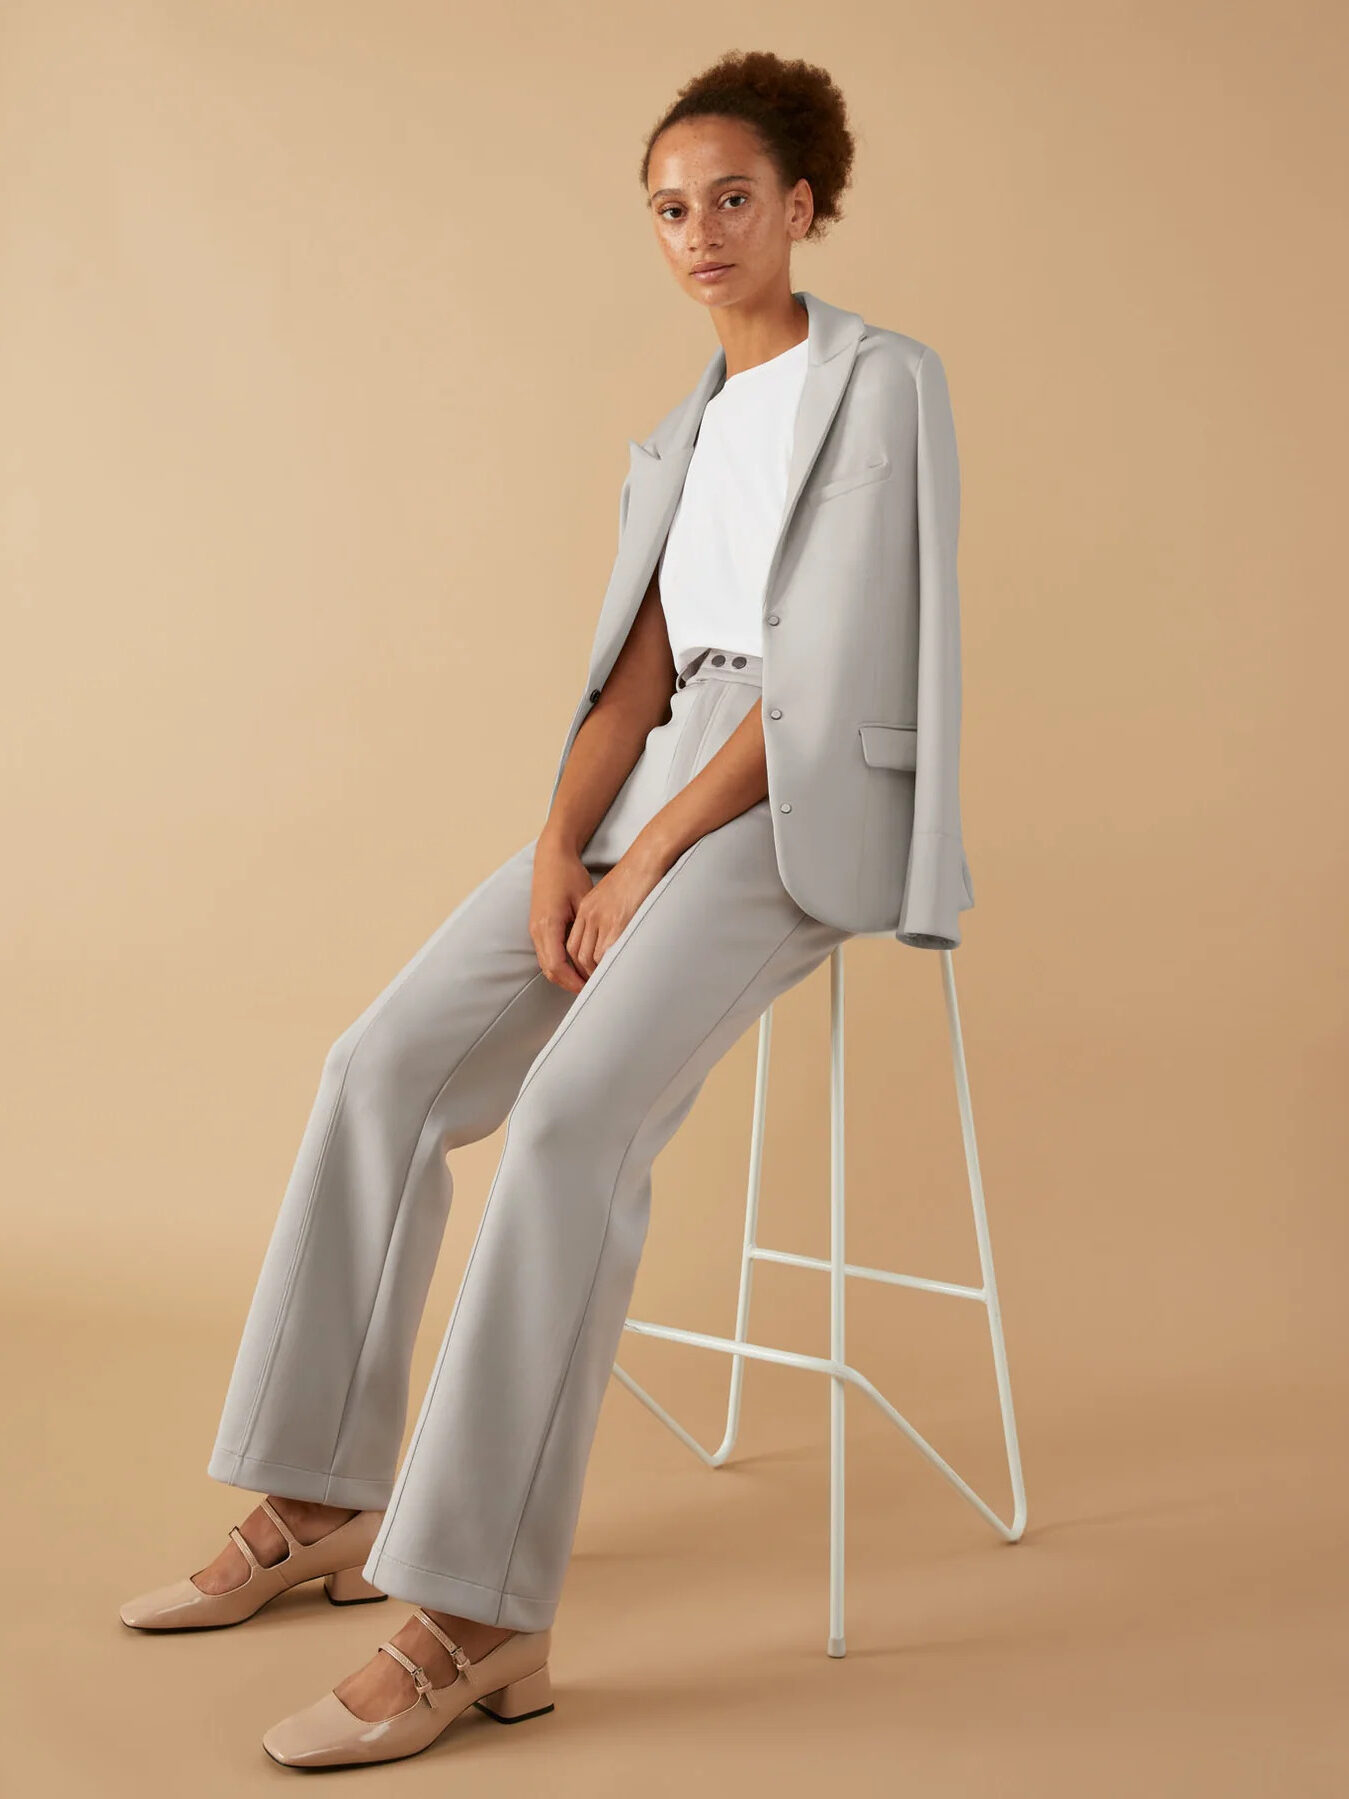 A woman is sitting on a stool in a grey suit.